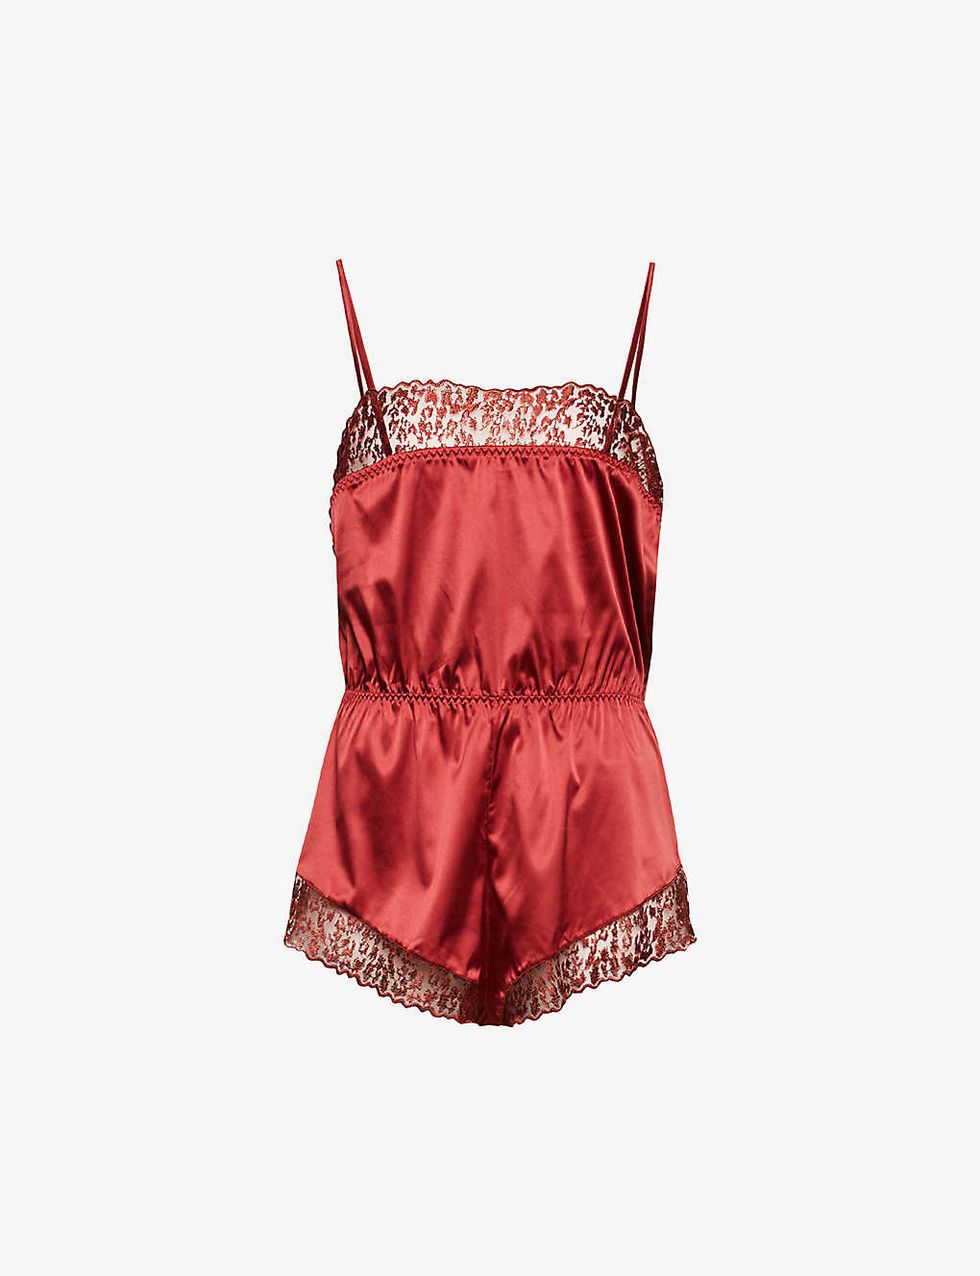 Lola Square-Neck Stretch-Satin and Lace Teddy